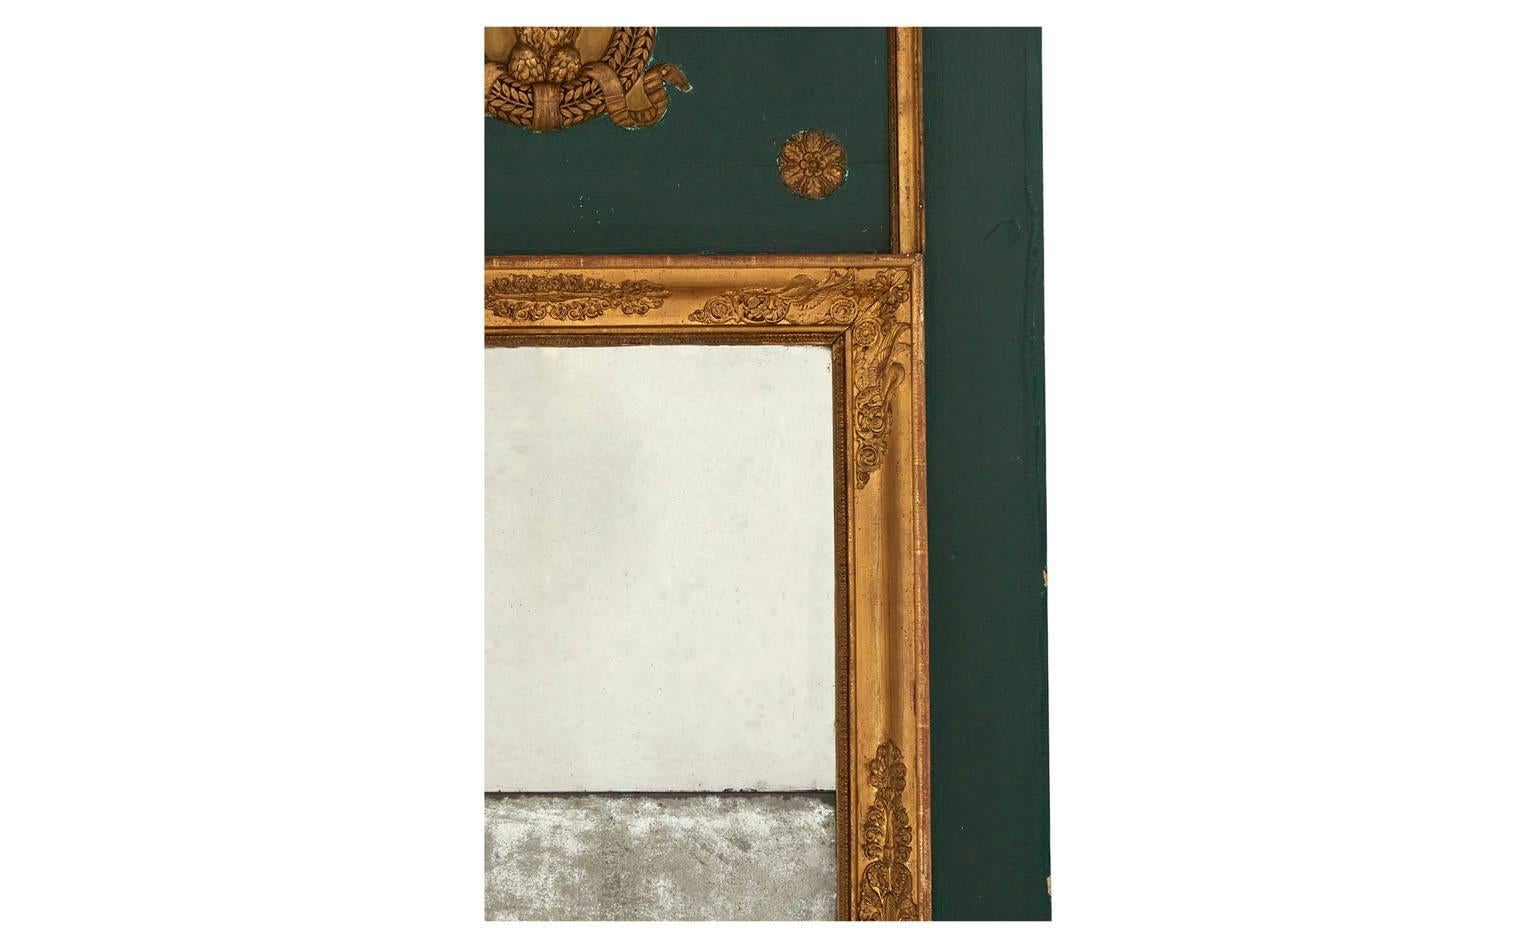 Hand-painted green trumeau panel
Gilded frame with original mirror
20th century
France.
Measures: 3'D x 35'W x 76'H 